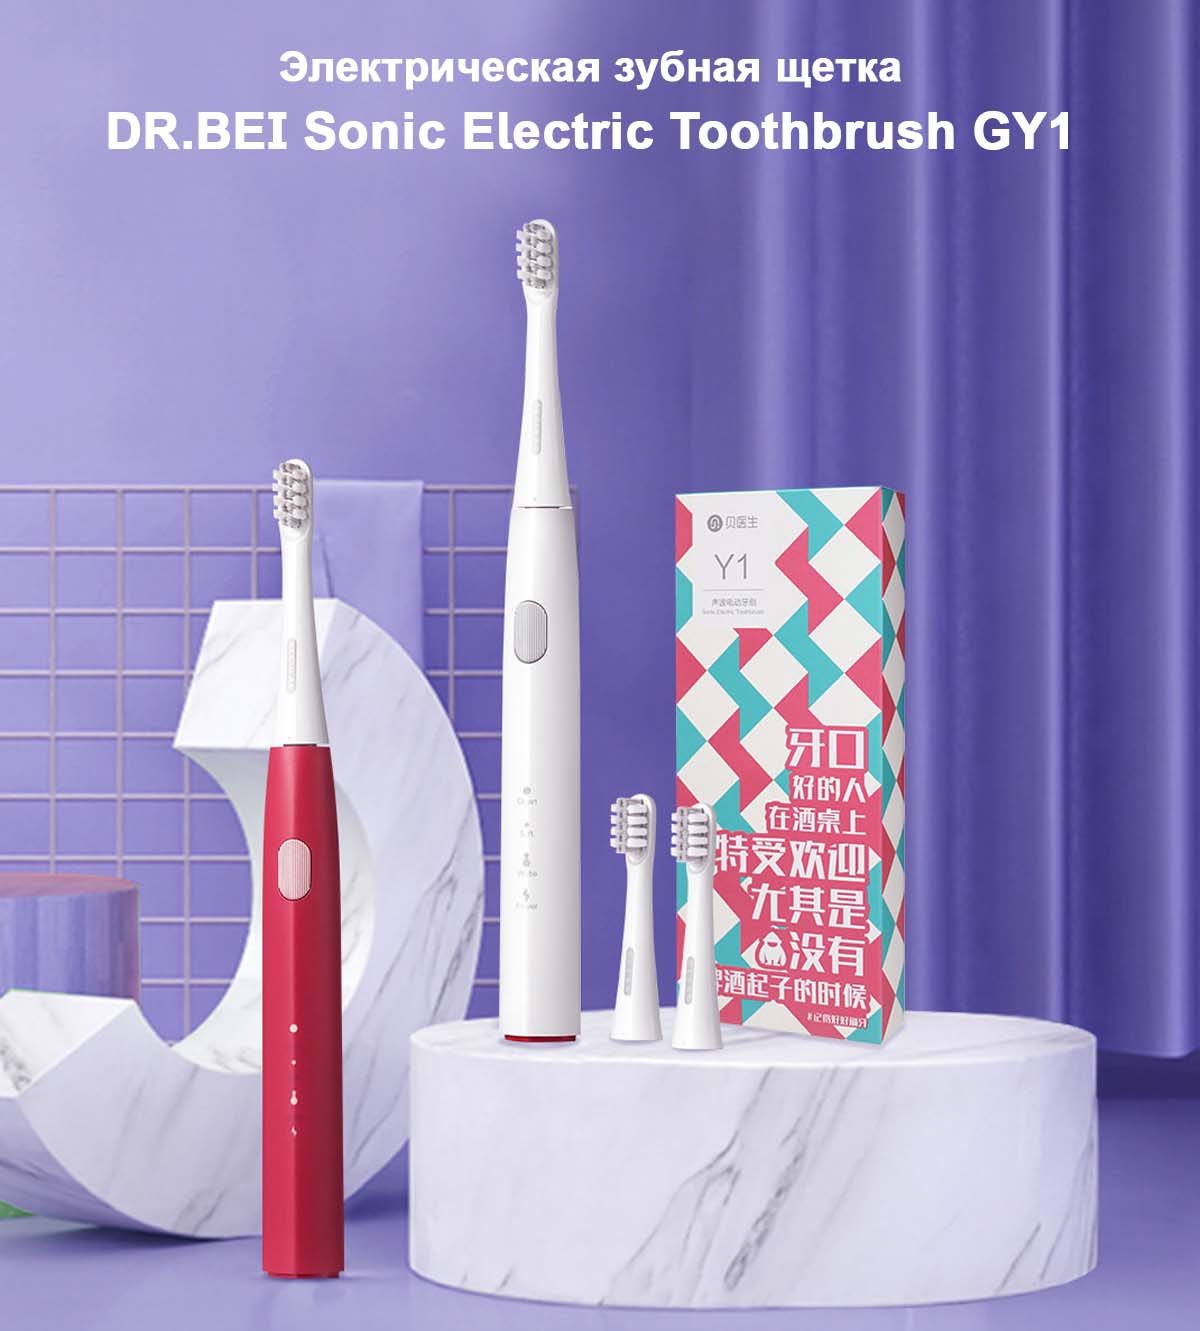 DR.BEI Sonic Electric Toothbrush GY1